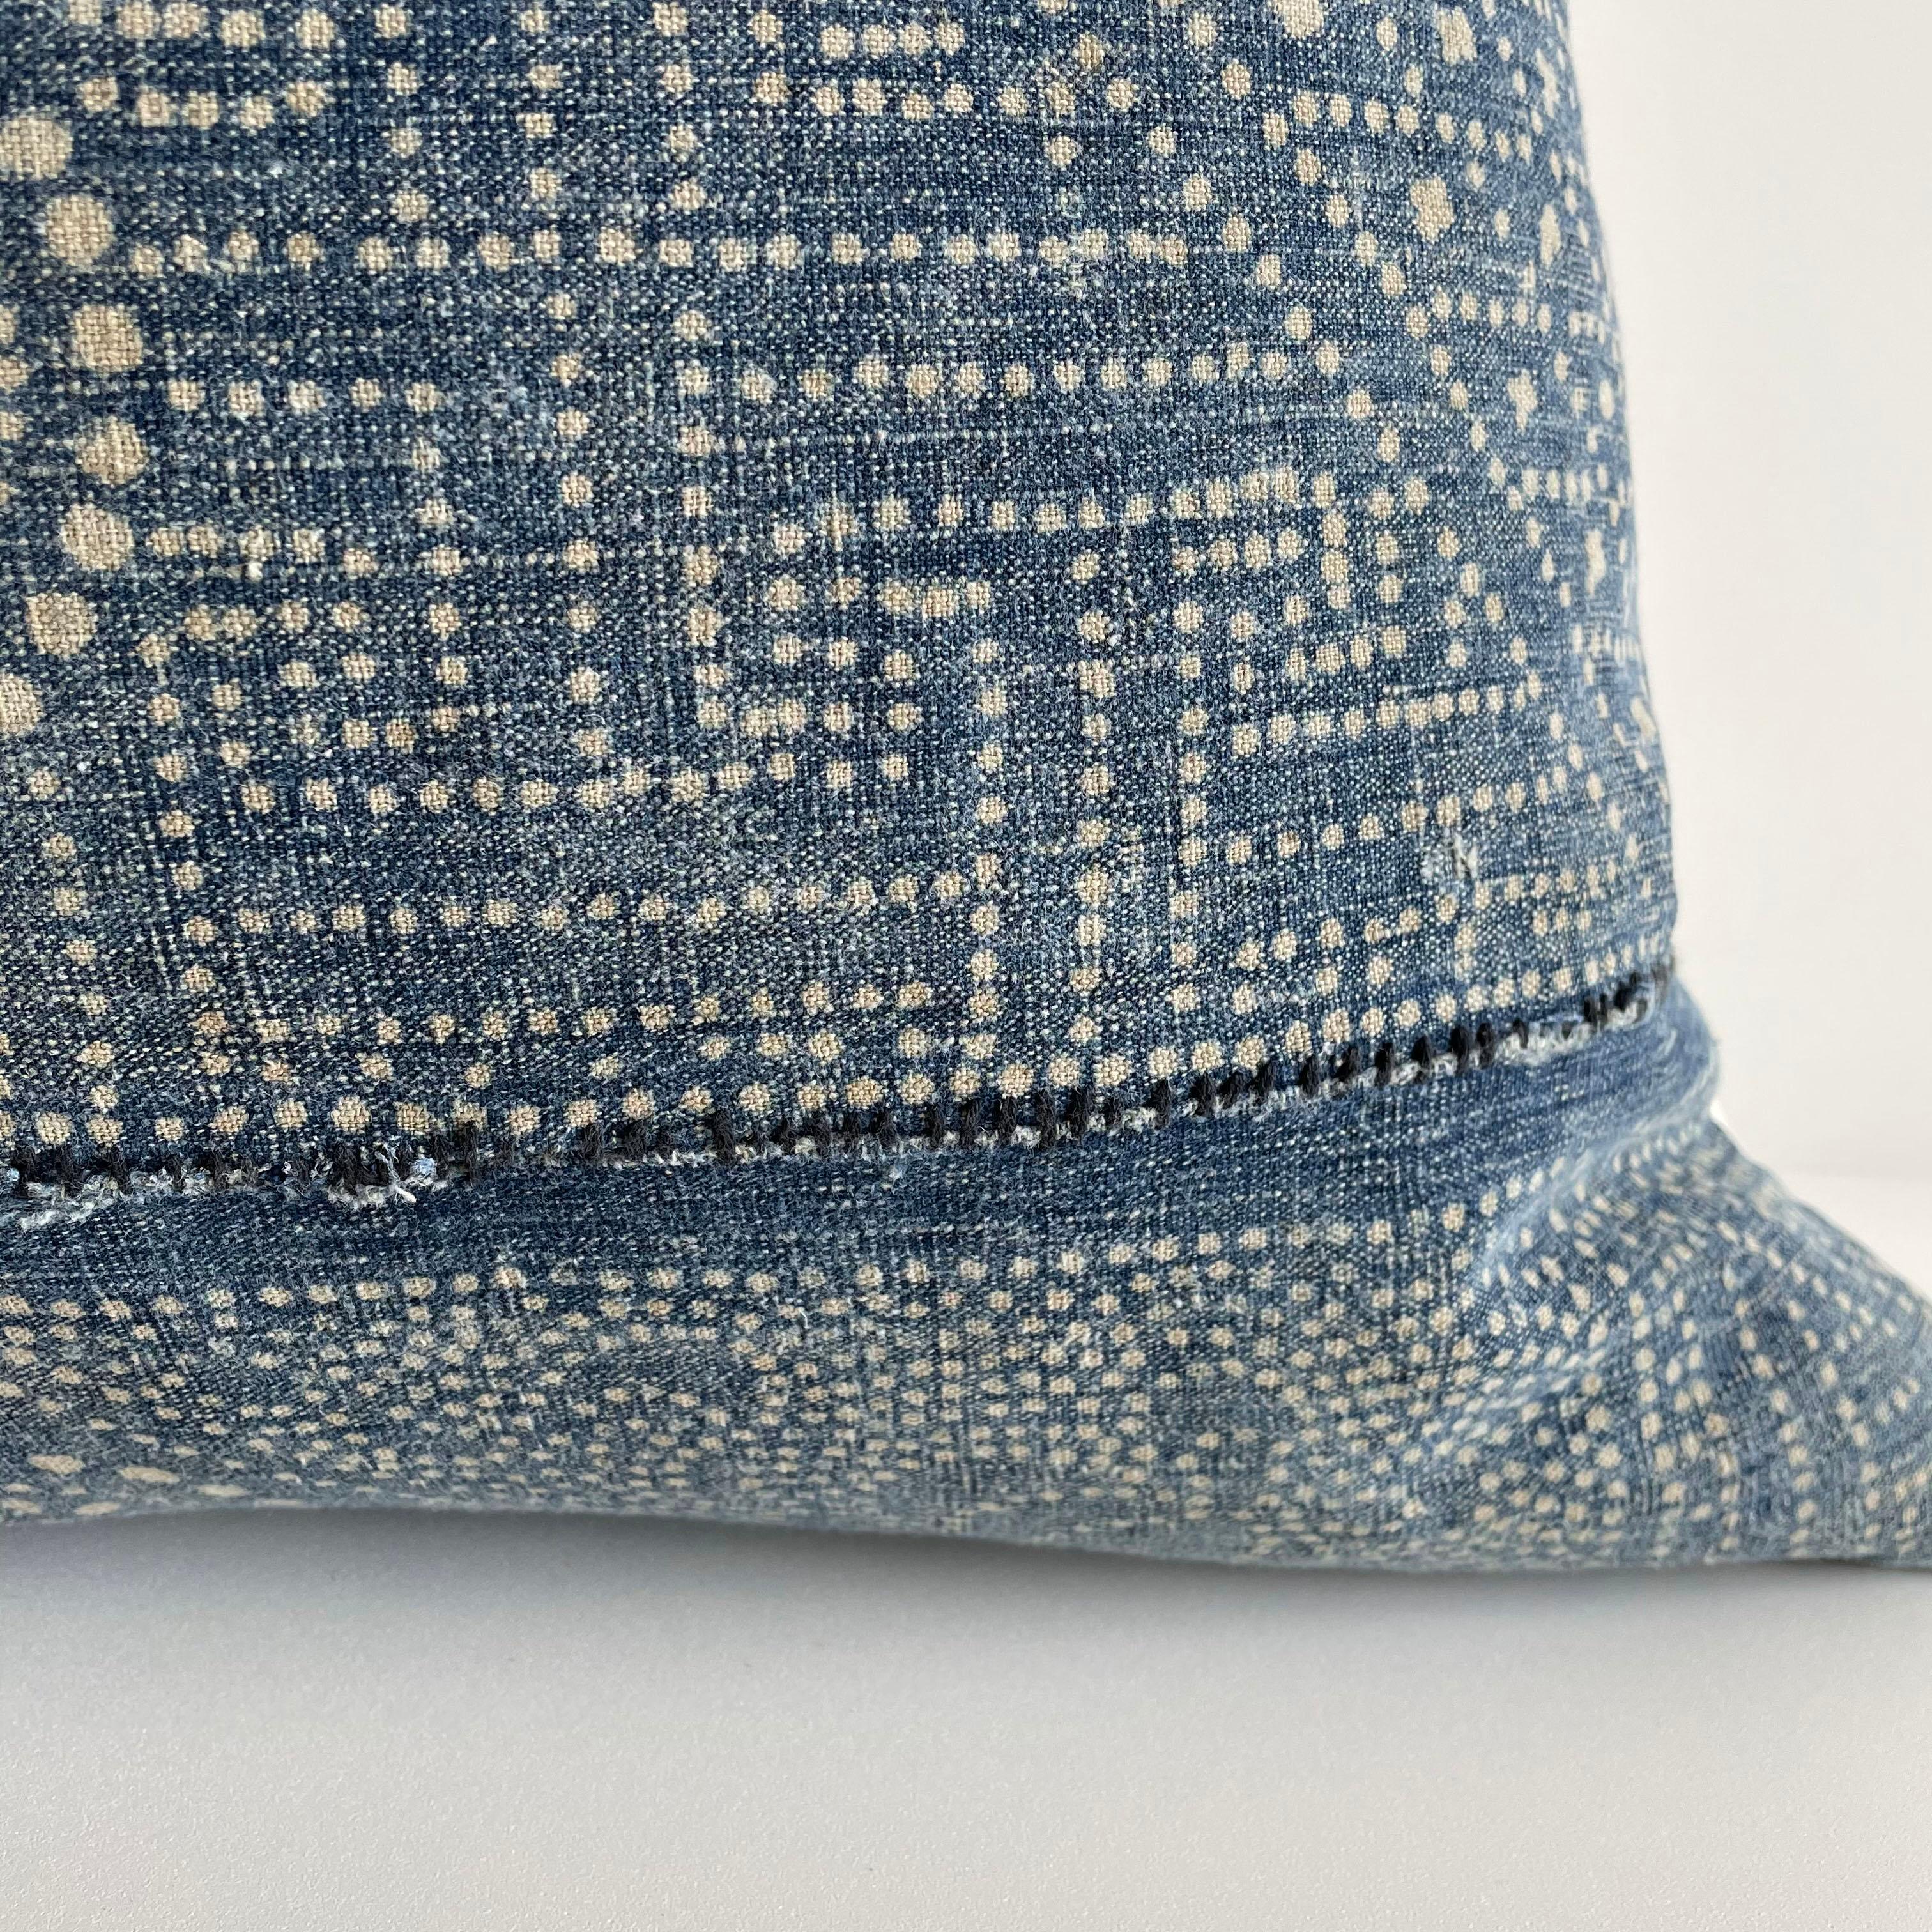 Vintage custom made Batik blue accent pillow with down feather insert this vintage textile pillow face features a vintage batik front, natural linen backing, and original hand embroidery. The backing is 100% Belgian linen in natural linen. Our